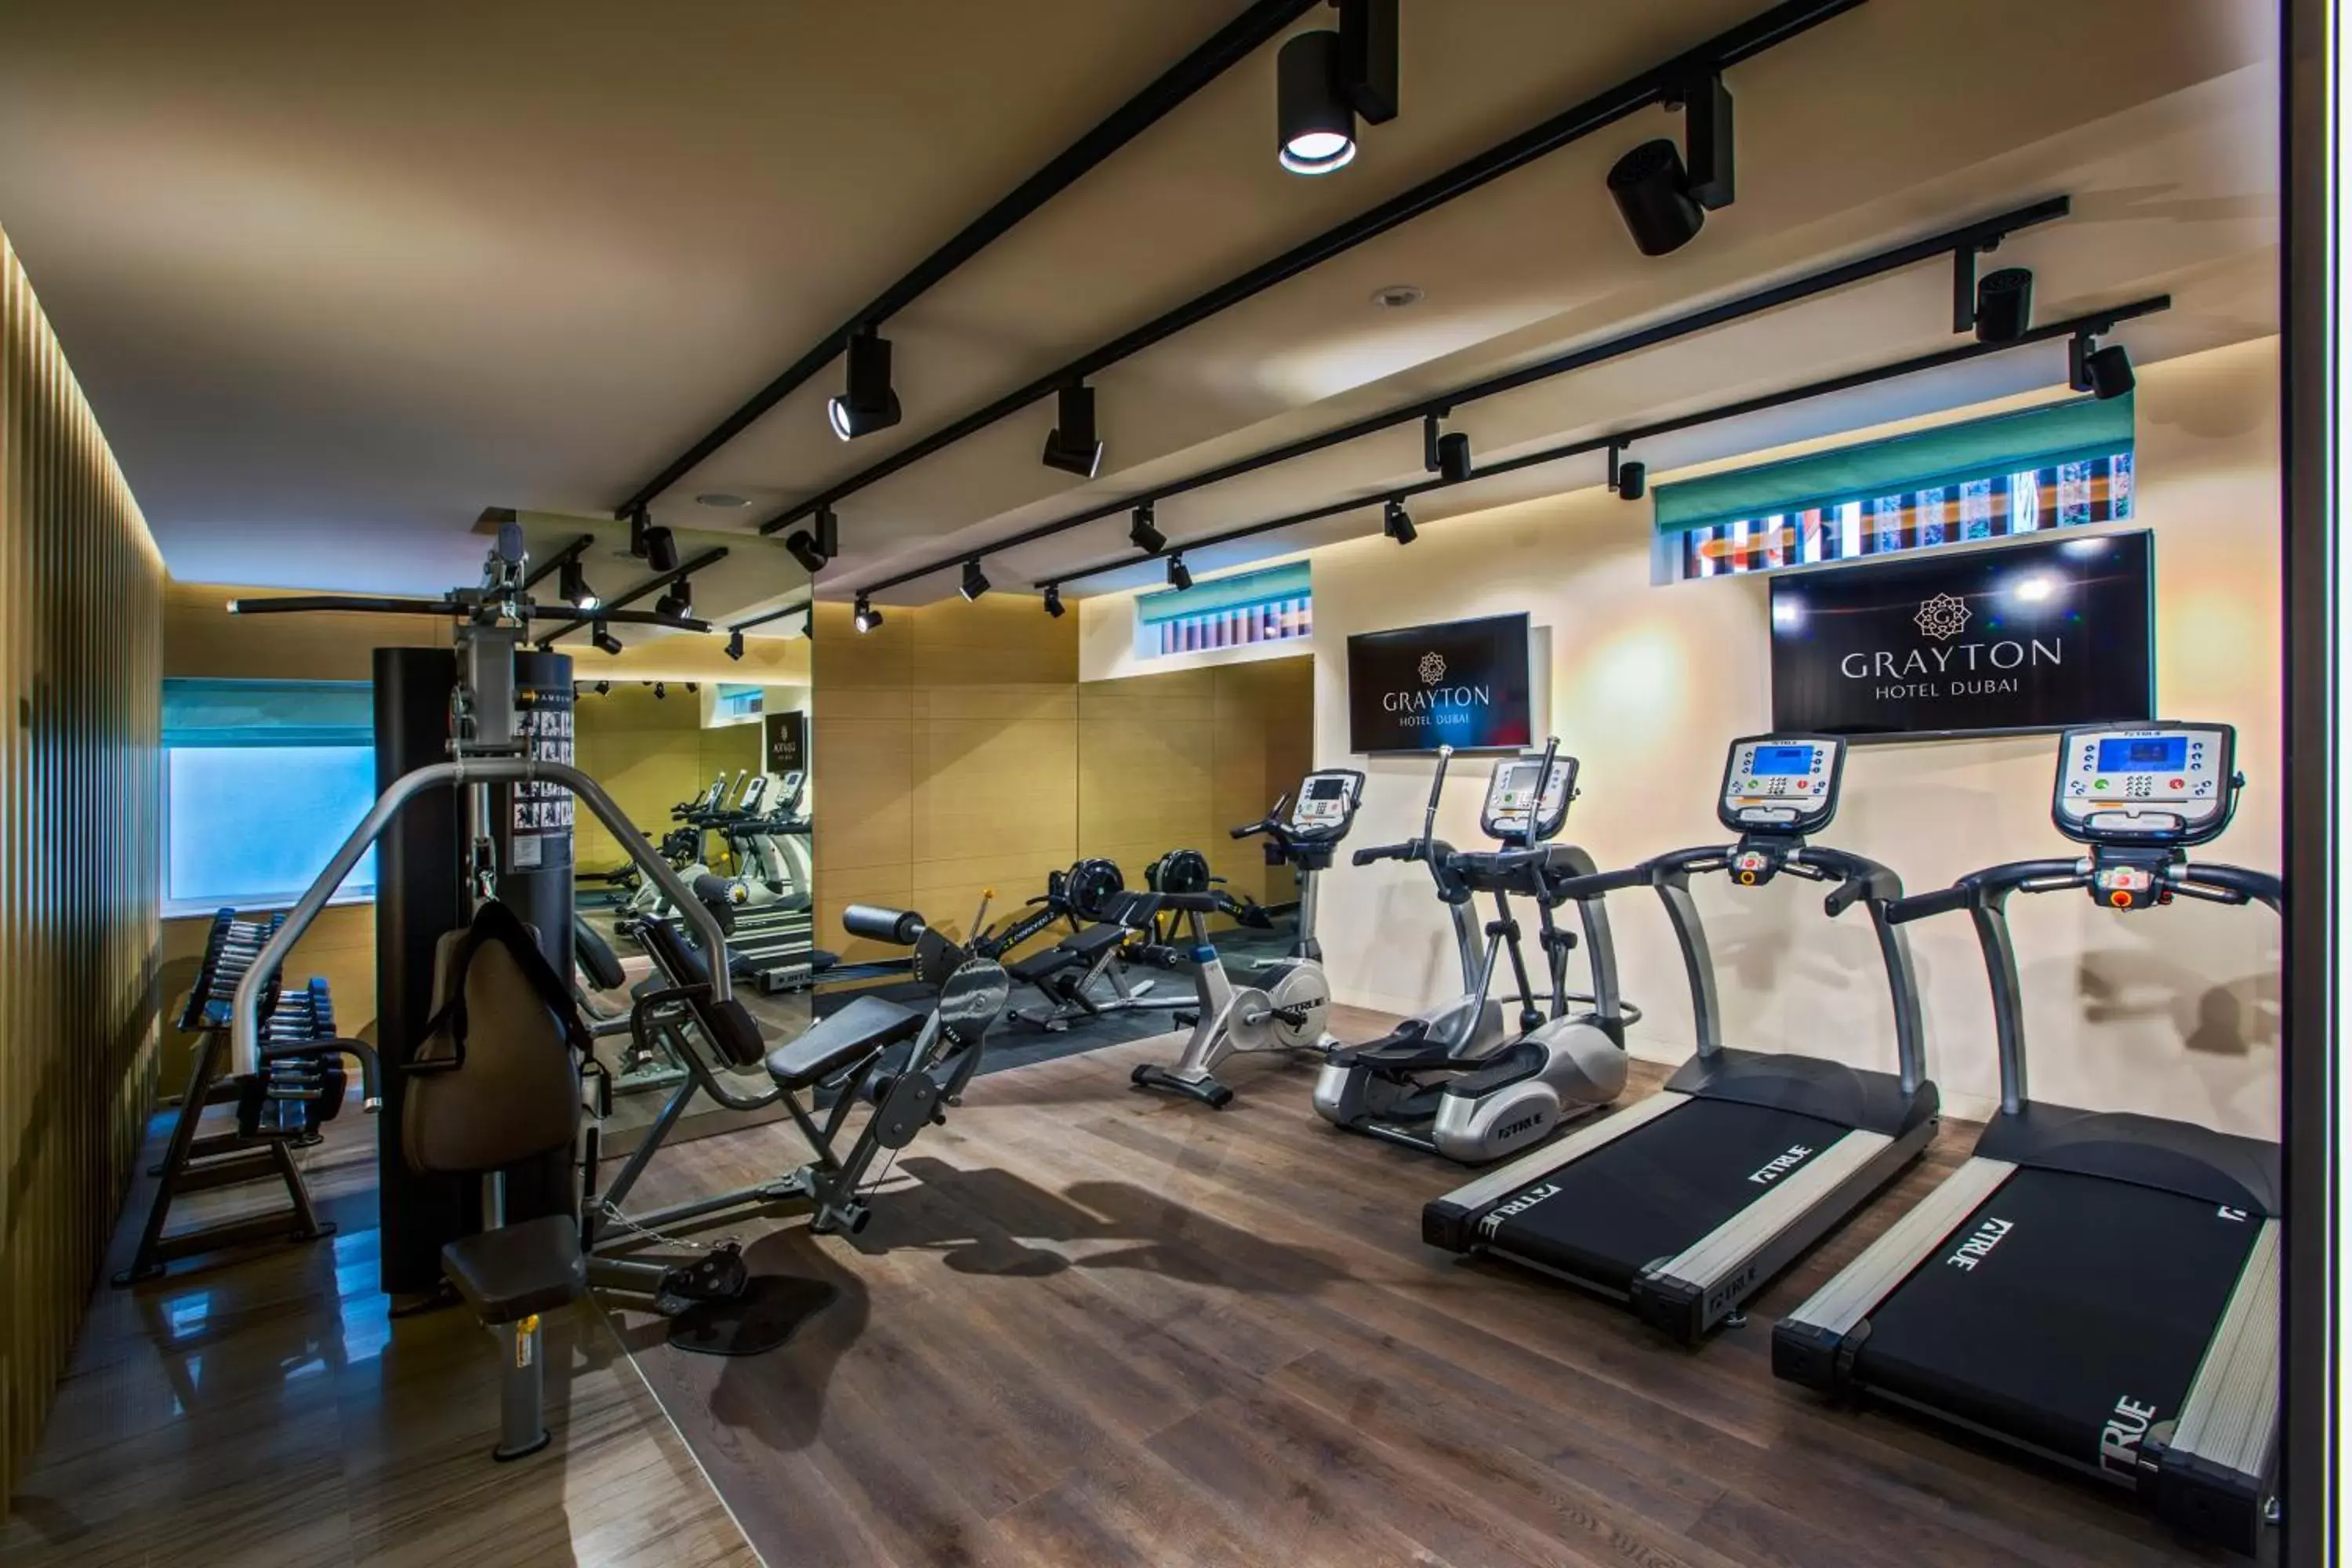 Fitness centre/facilities, Fitness Center/Facilities in Grayton Hotel by Blazon Hotels